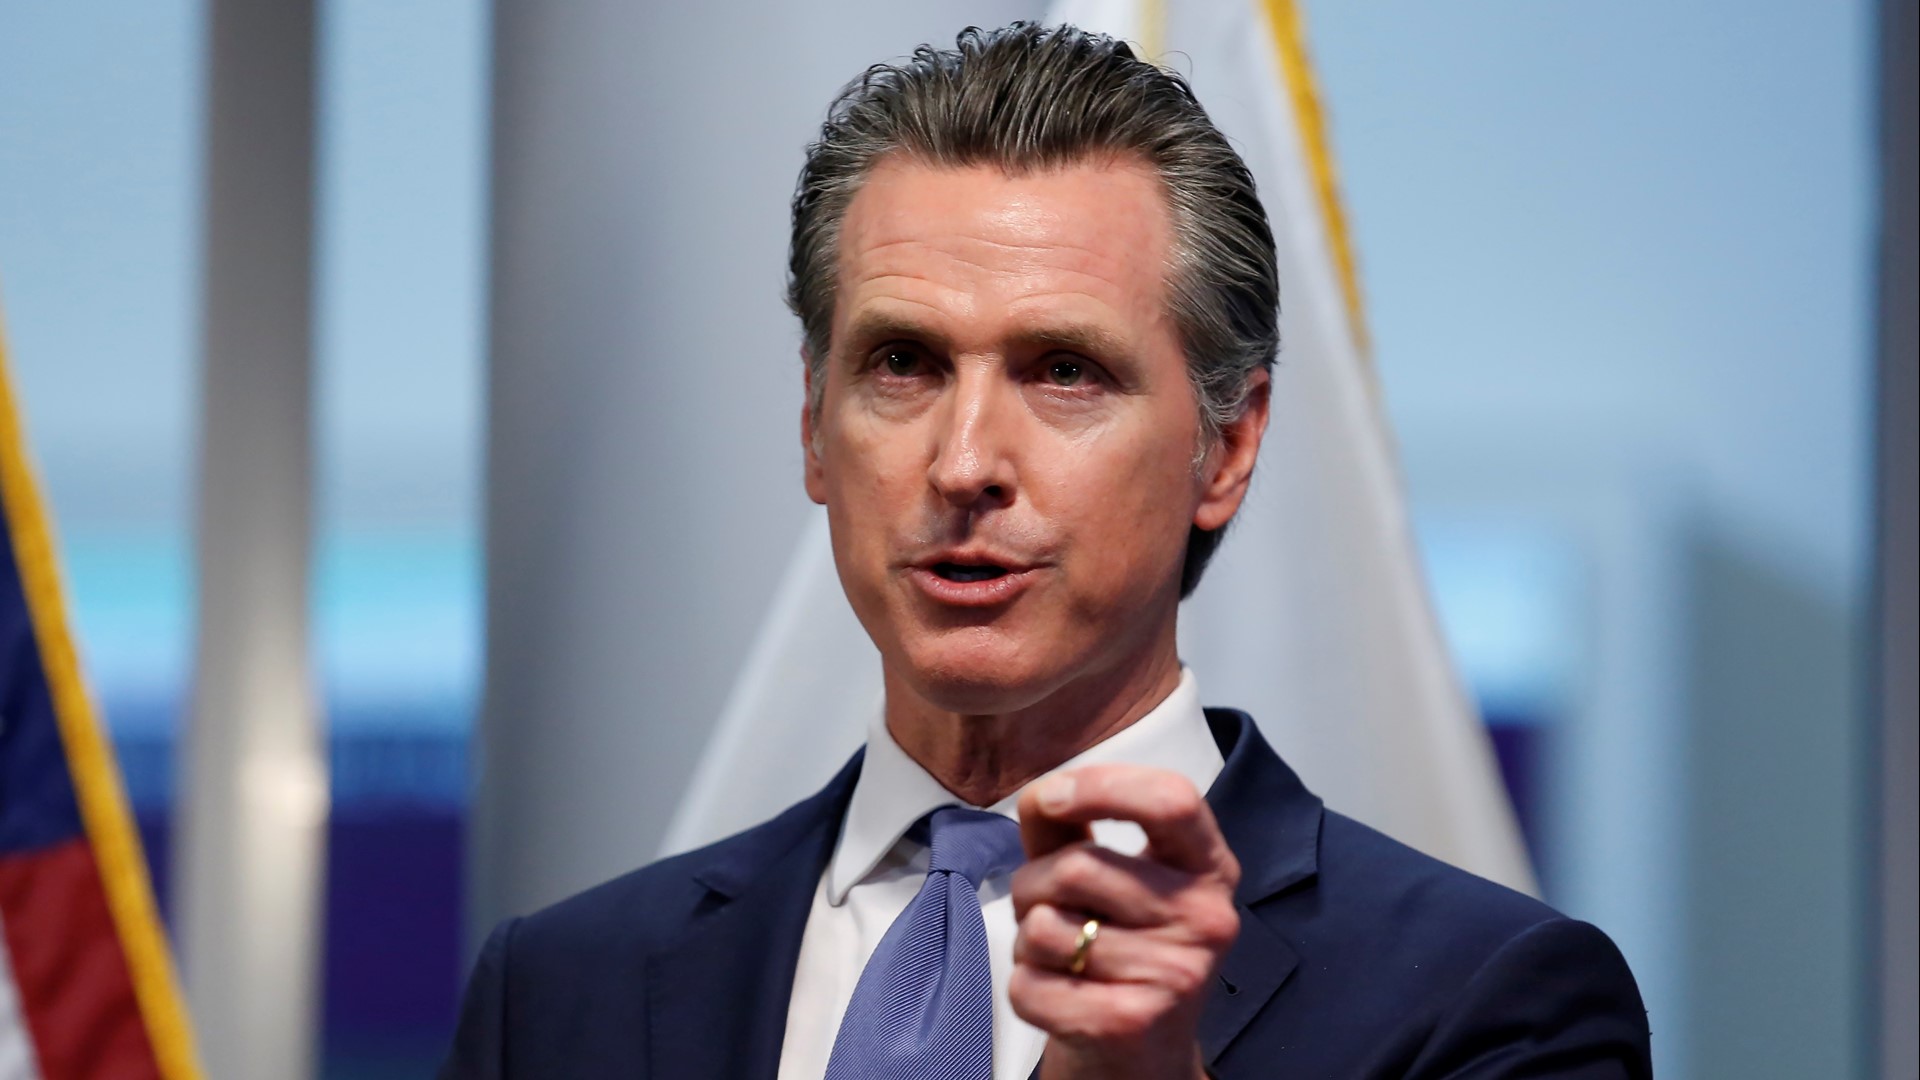 Governor Gavin Newsom mentions that banks are giving mortgage waivers, unemployment benefits are going up for Californians affected by coronavirus (COVID-19).